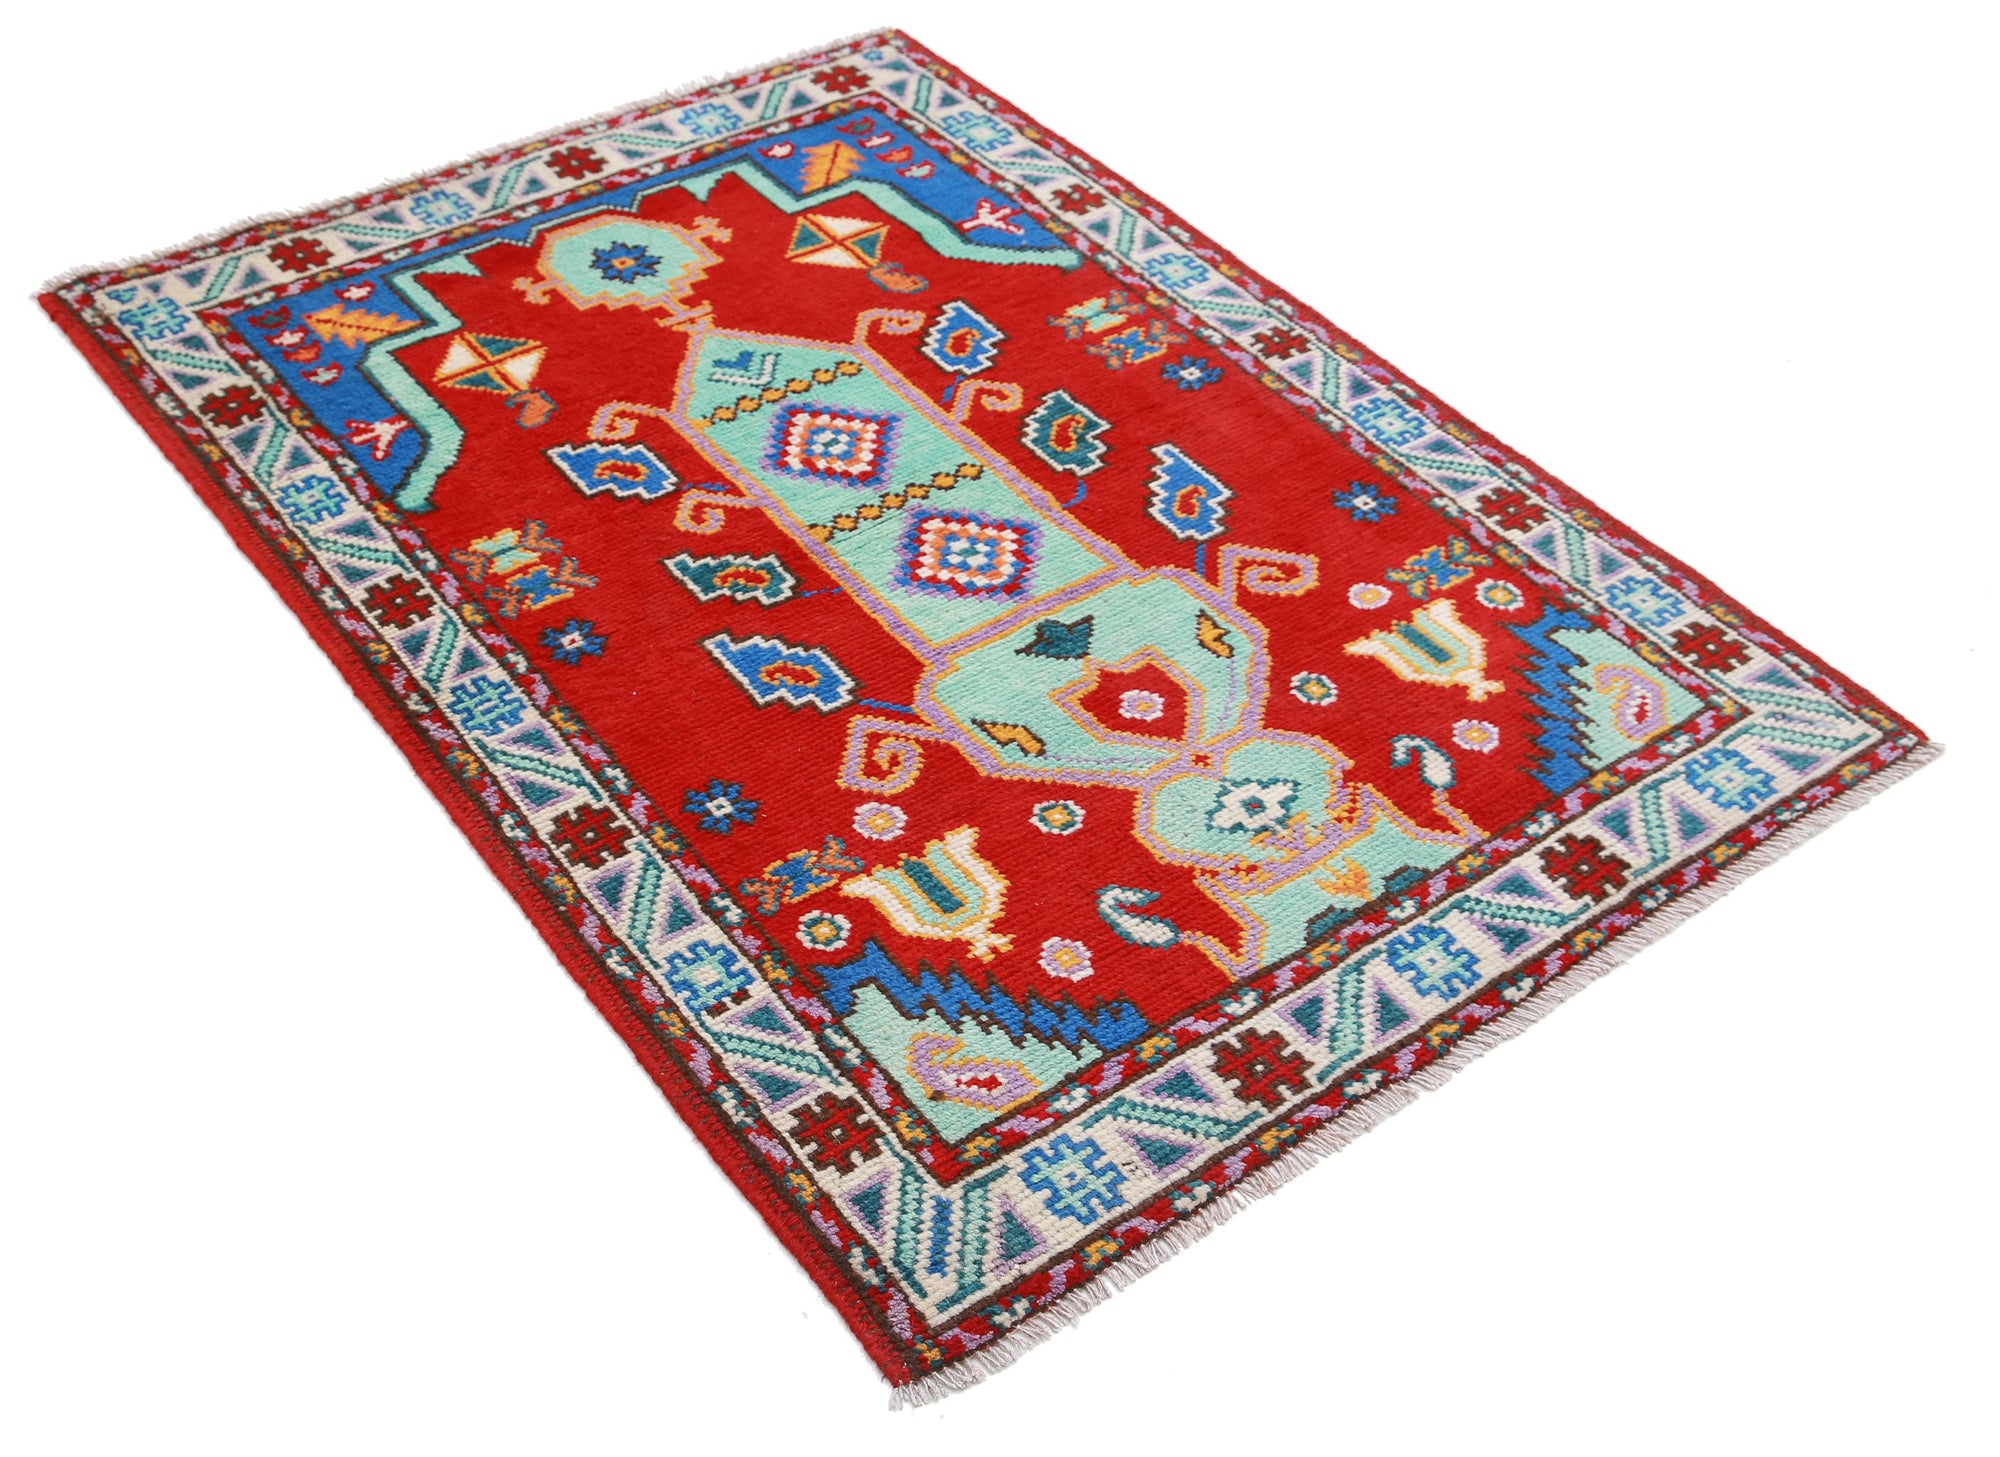 Revival-hand-knotted-qarghani-wool-rug-5014200-1.jpg